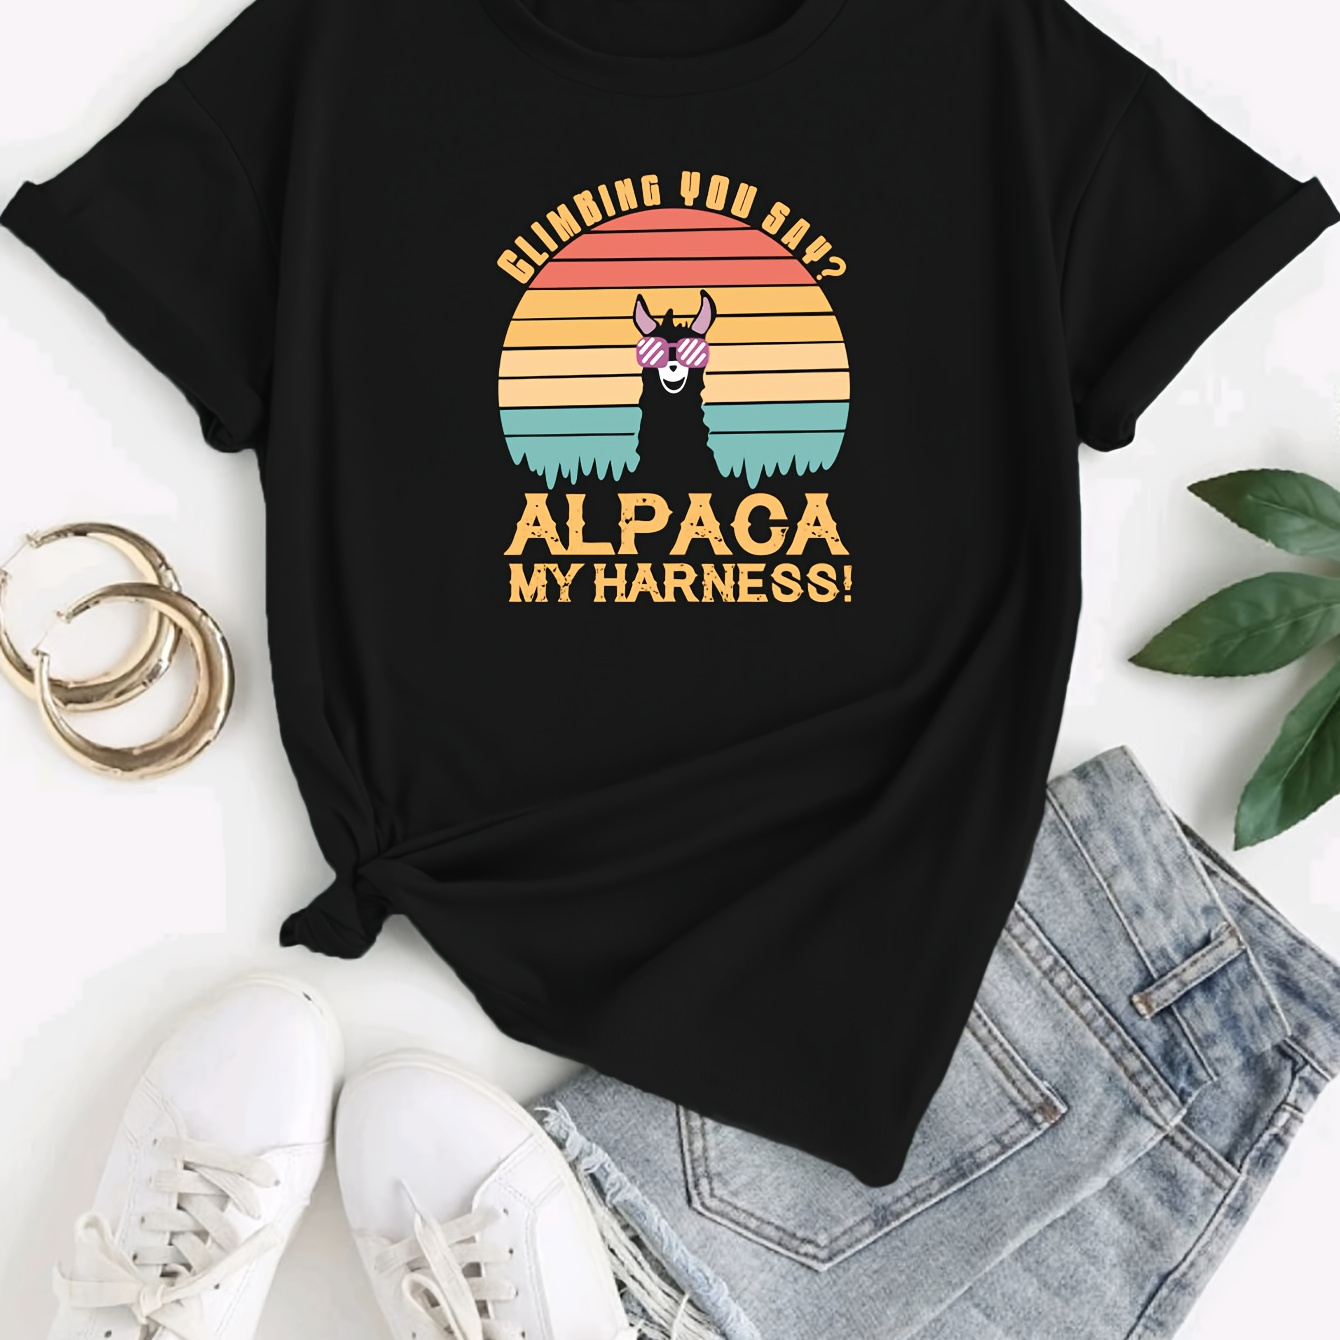 

Cool Alpaca & Letter Print T-shirt, Casual Crew Neck Short Sleeve Top For Spring & Summer, Women's Clothing